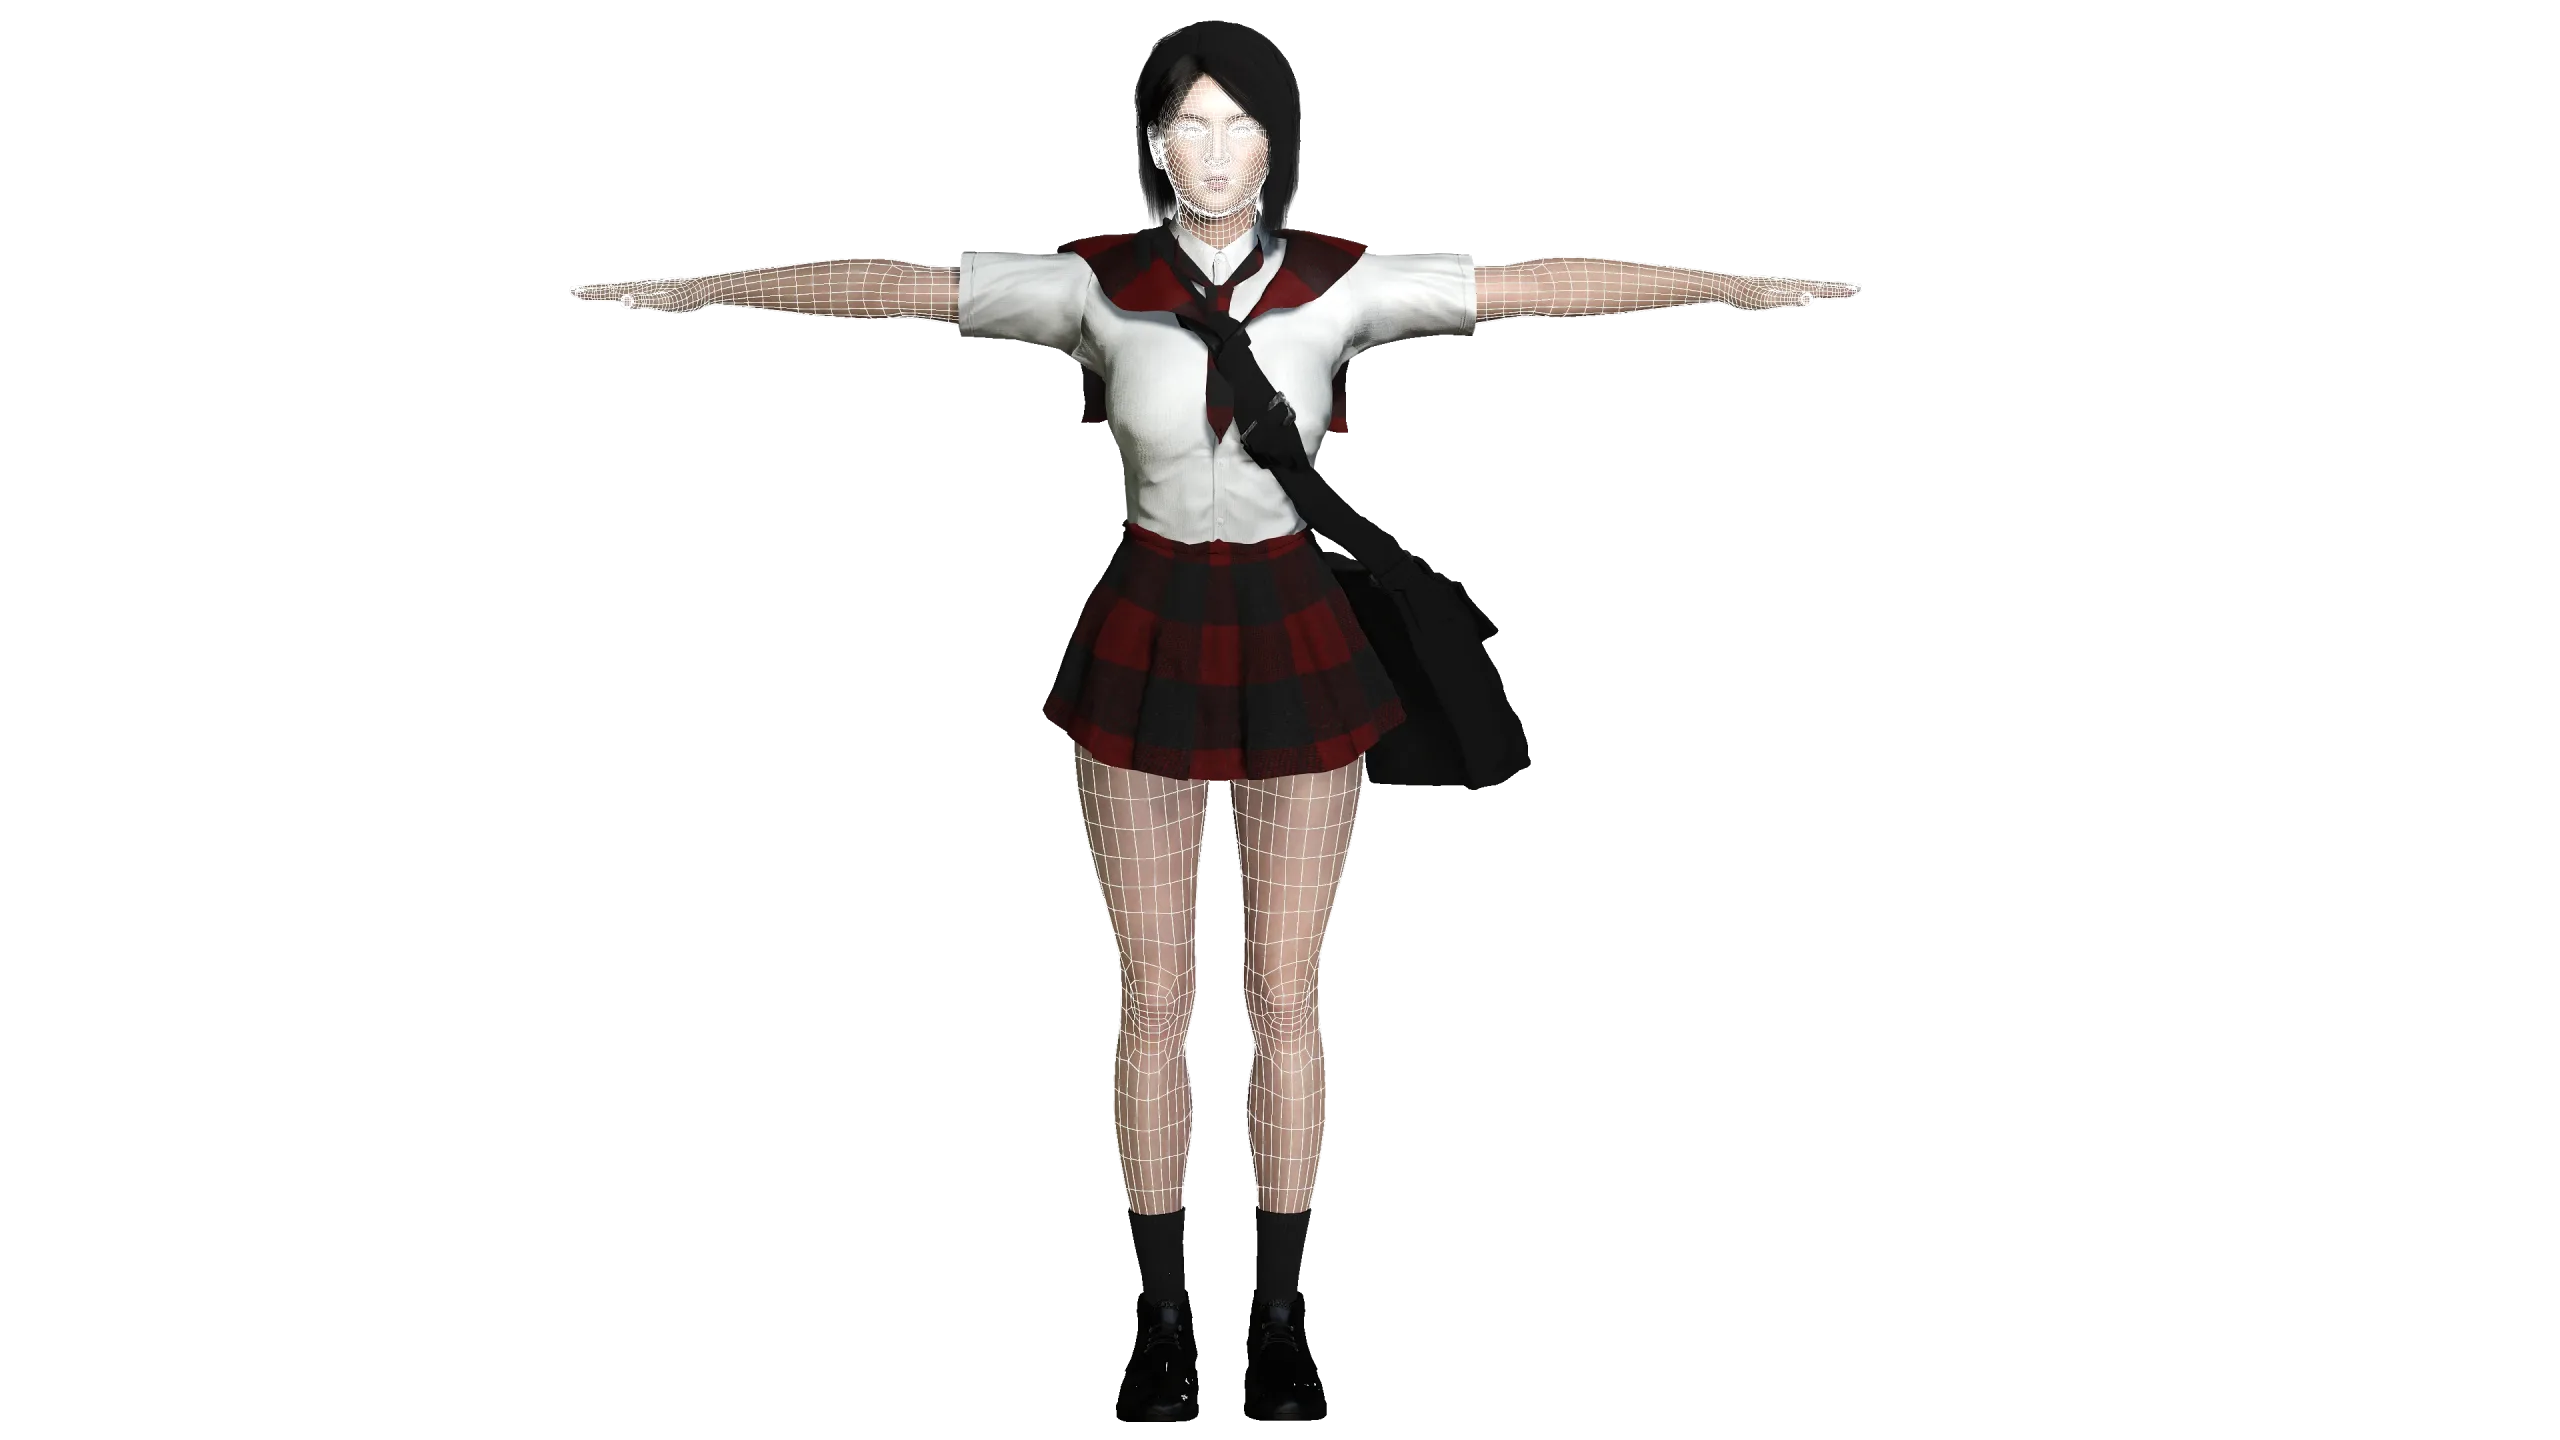 AAA 3D ASIAN SCHOOL GIRL - REALISTIC GAME READY CHARACTER